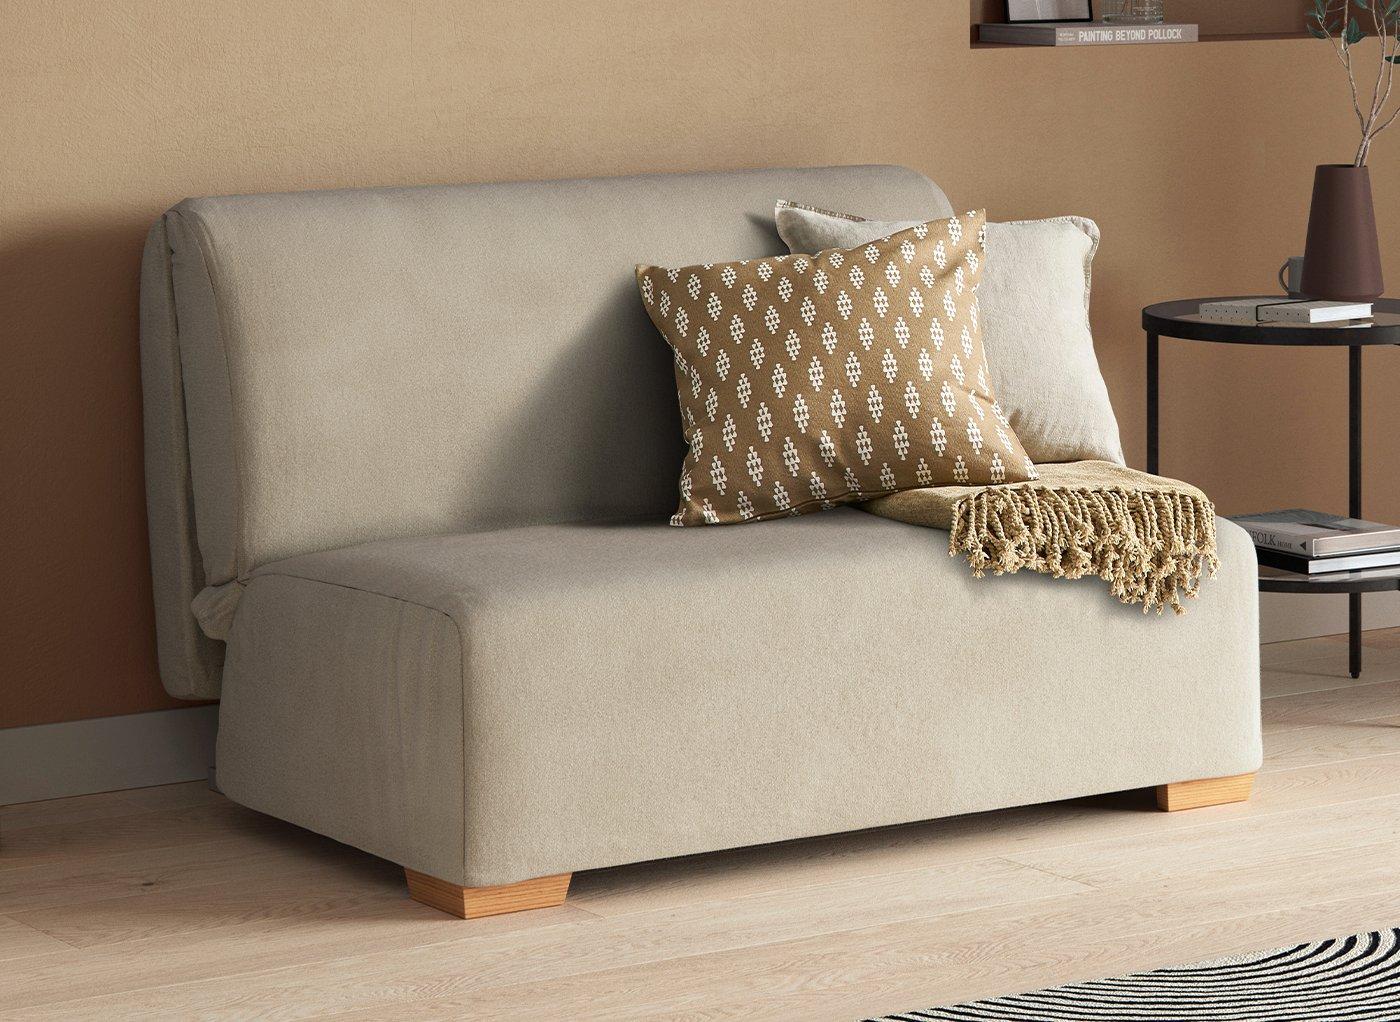 Cork 2 Seater 4'0 A-Frame Sofa Bed - Cream Small Double